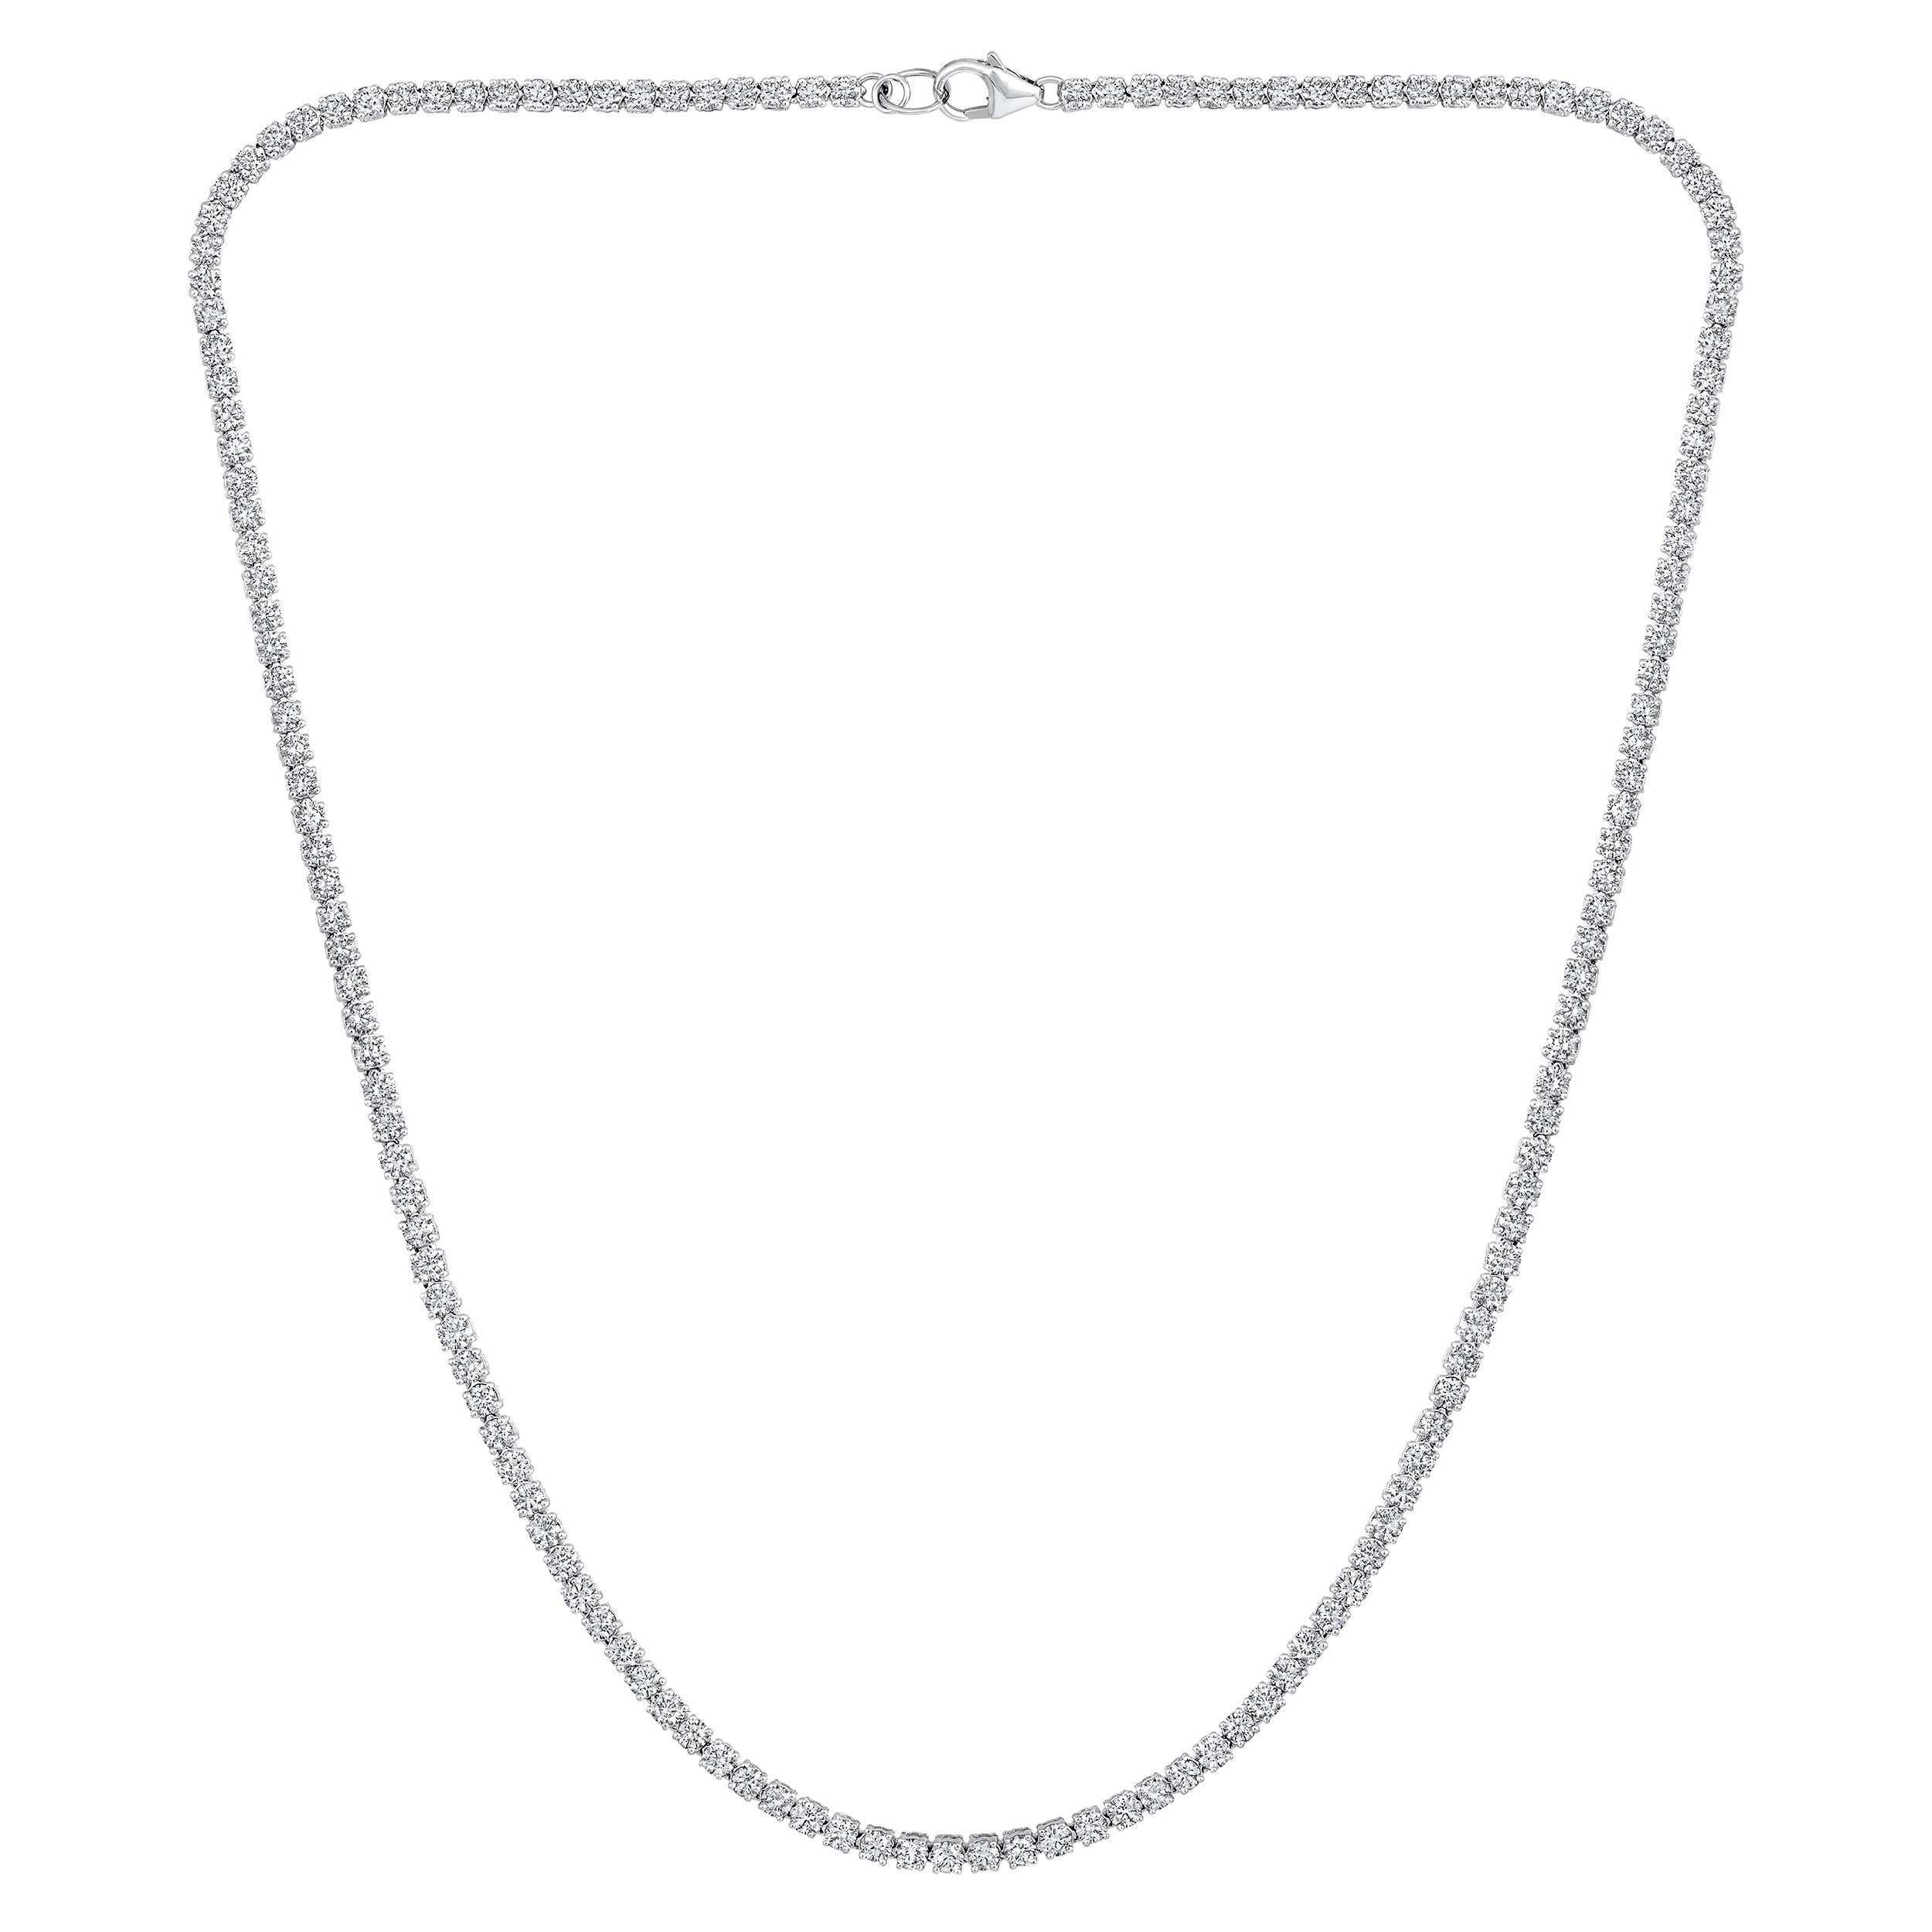 Crafted in 10.49 grams of 14K White Gold, the necklace contains 142 stones of Round Diamonds with a total of 6.09 carat in F-G color and VS-SI carat. The necklace length is 16 inches.

This jewelry piece will be expertly crafted by our skilled